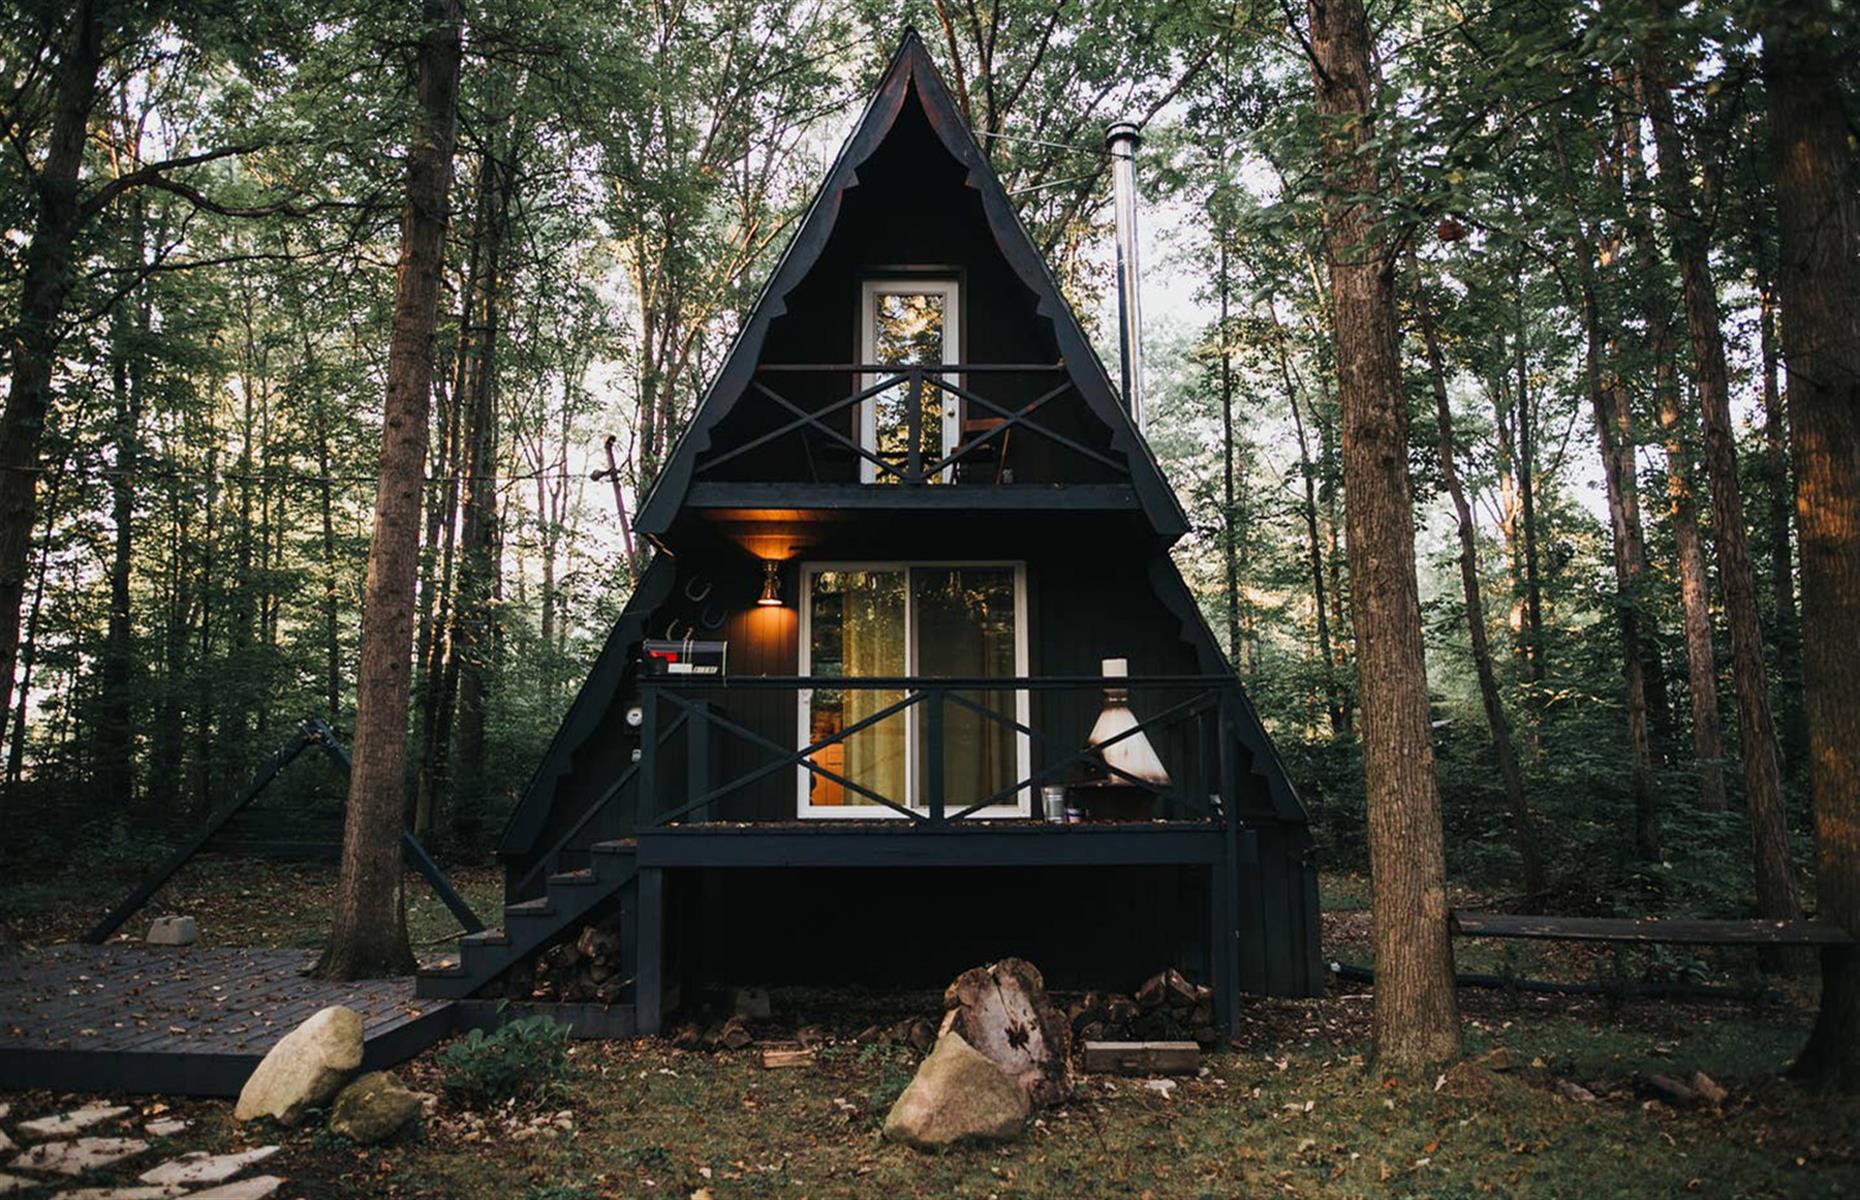 <p>Those looking to escape the city need look no further than this unique A-frame home called <a href="https://www.airbnb.co.uk/rooms/22995081">The Triangle</a>. Able to accommodate four guests, it comes complete with a wood-burning stove, exposed beams throughout and small terraces on both levels. The quaint village of West Farmington has several local produce shops (it's recommended you call ahead before visiting), while the surrounding landscape is fantastic for relaxing nature walks. The bolthole is available to book from $86 a night.</p>